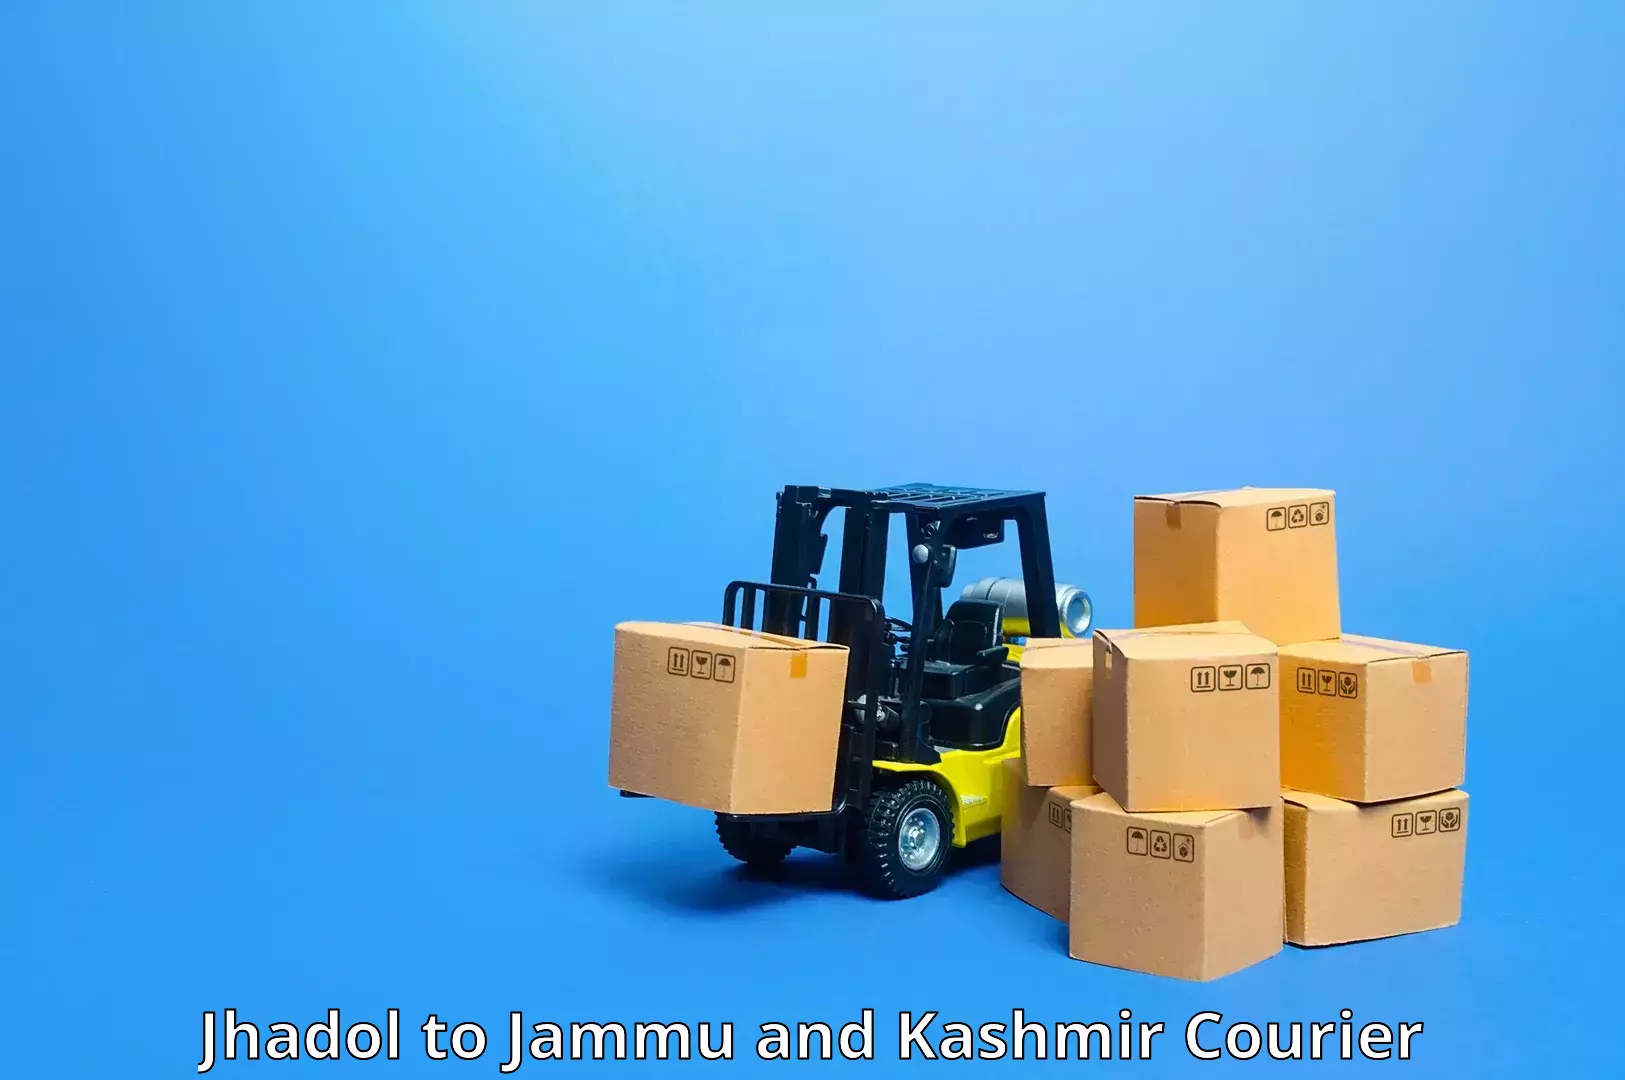 Quality courier services Jhadol to Bohri